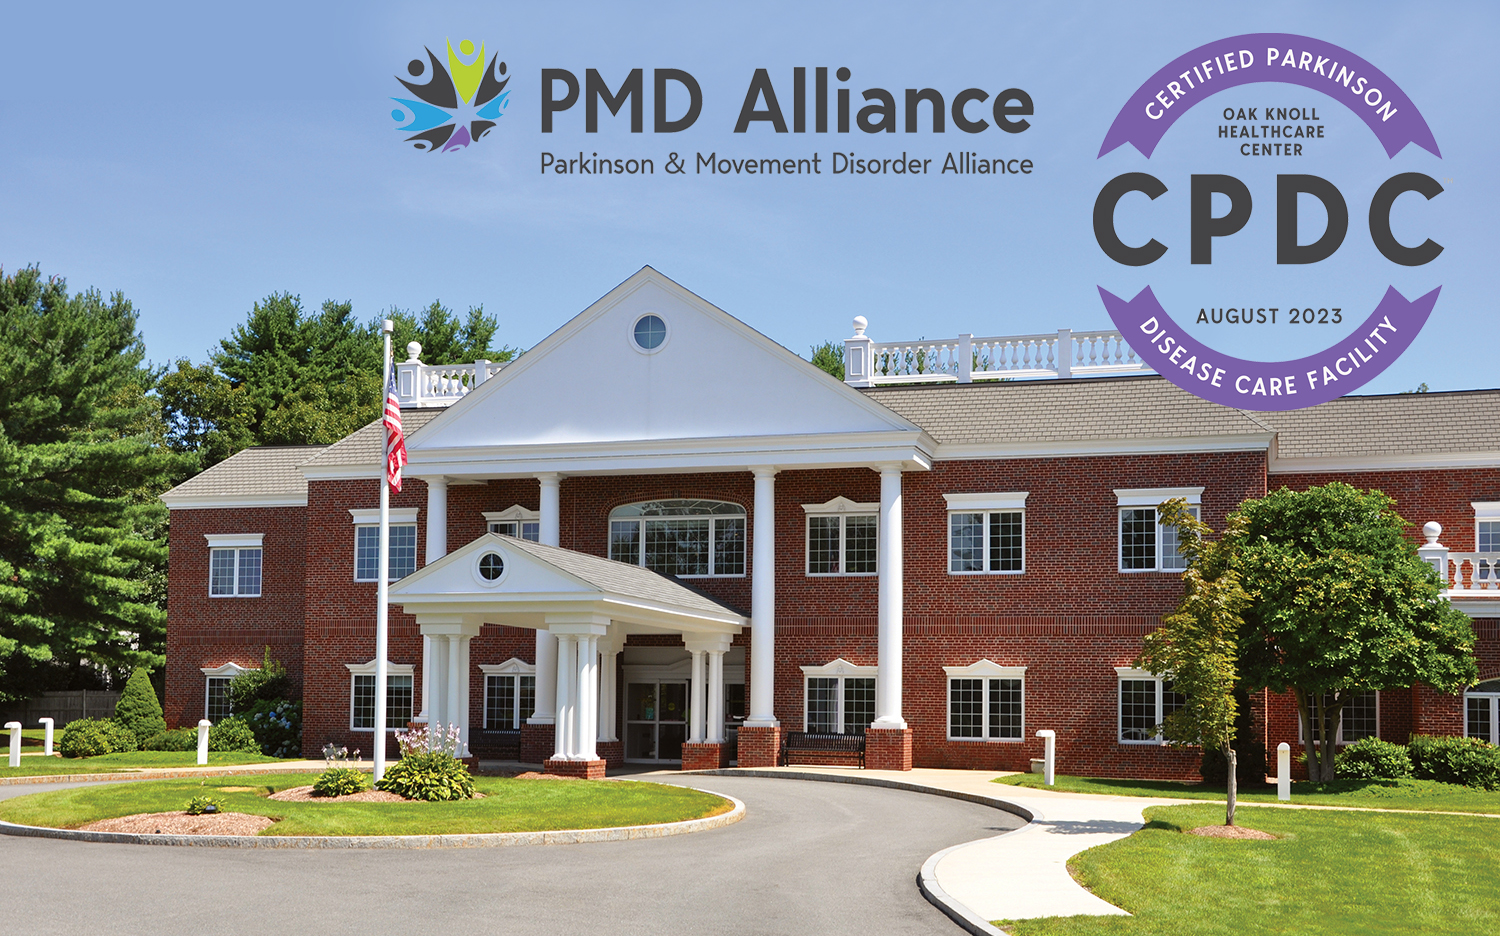 Oak Knoll Healthcare Center just completed our Certified Parkinson Disease Care™ (CPDC™) accreditation through the Parkinson Movement & Disorder Alliance (PMD)!